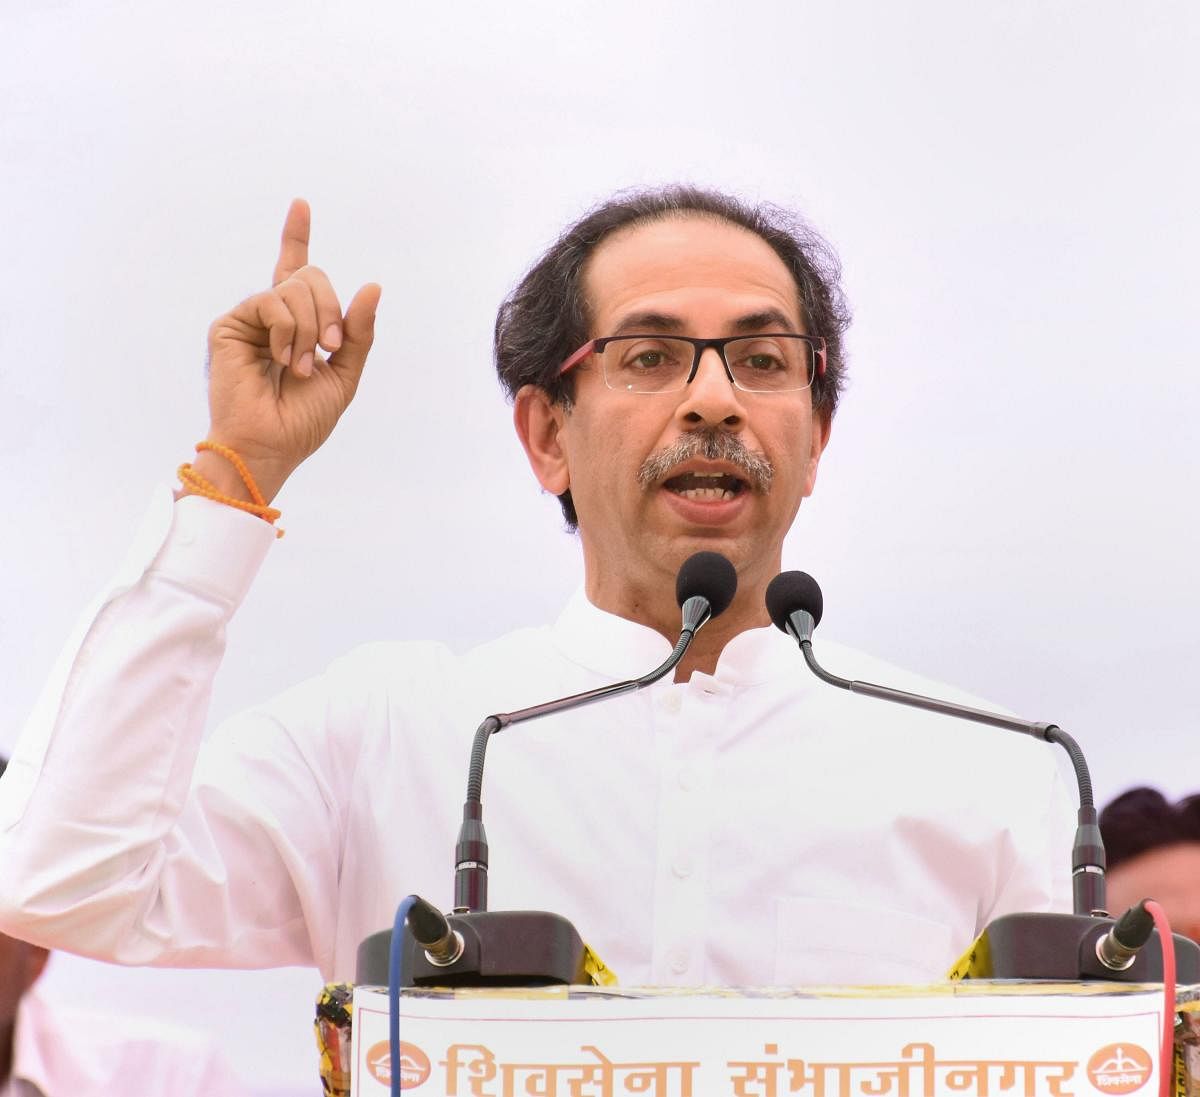 When asked about it, Thackeray said the announcement of political alliance between the BJP and Shiv Sena was made ahead of the Lok Sabha elections this year in Mumbai itself.(PTI Photo)